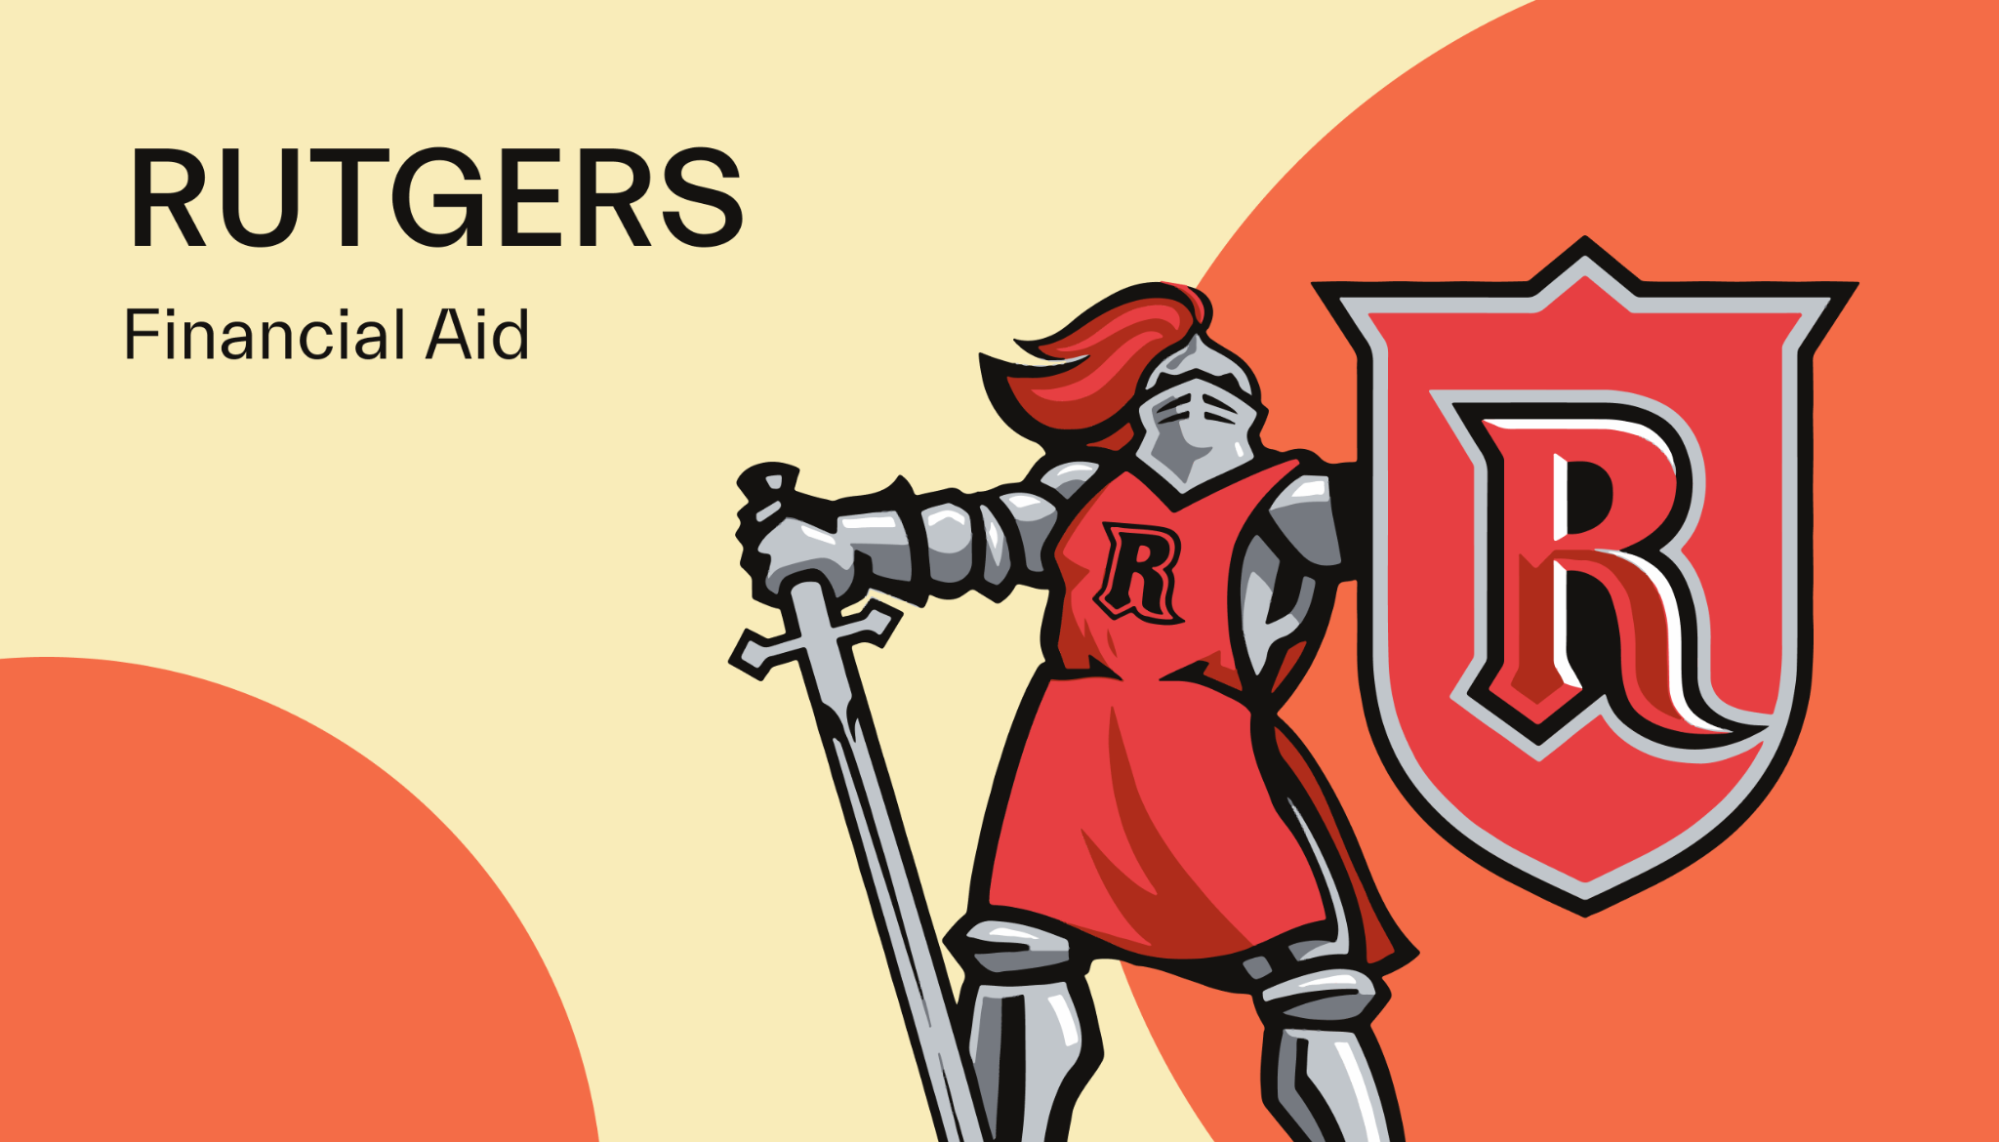  Illustration of Rutgers Knight mascot with blog title